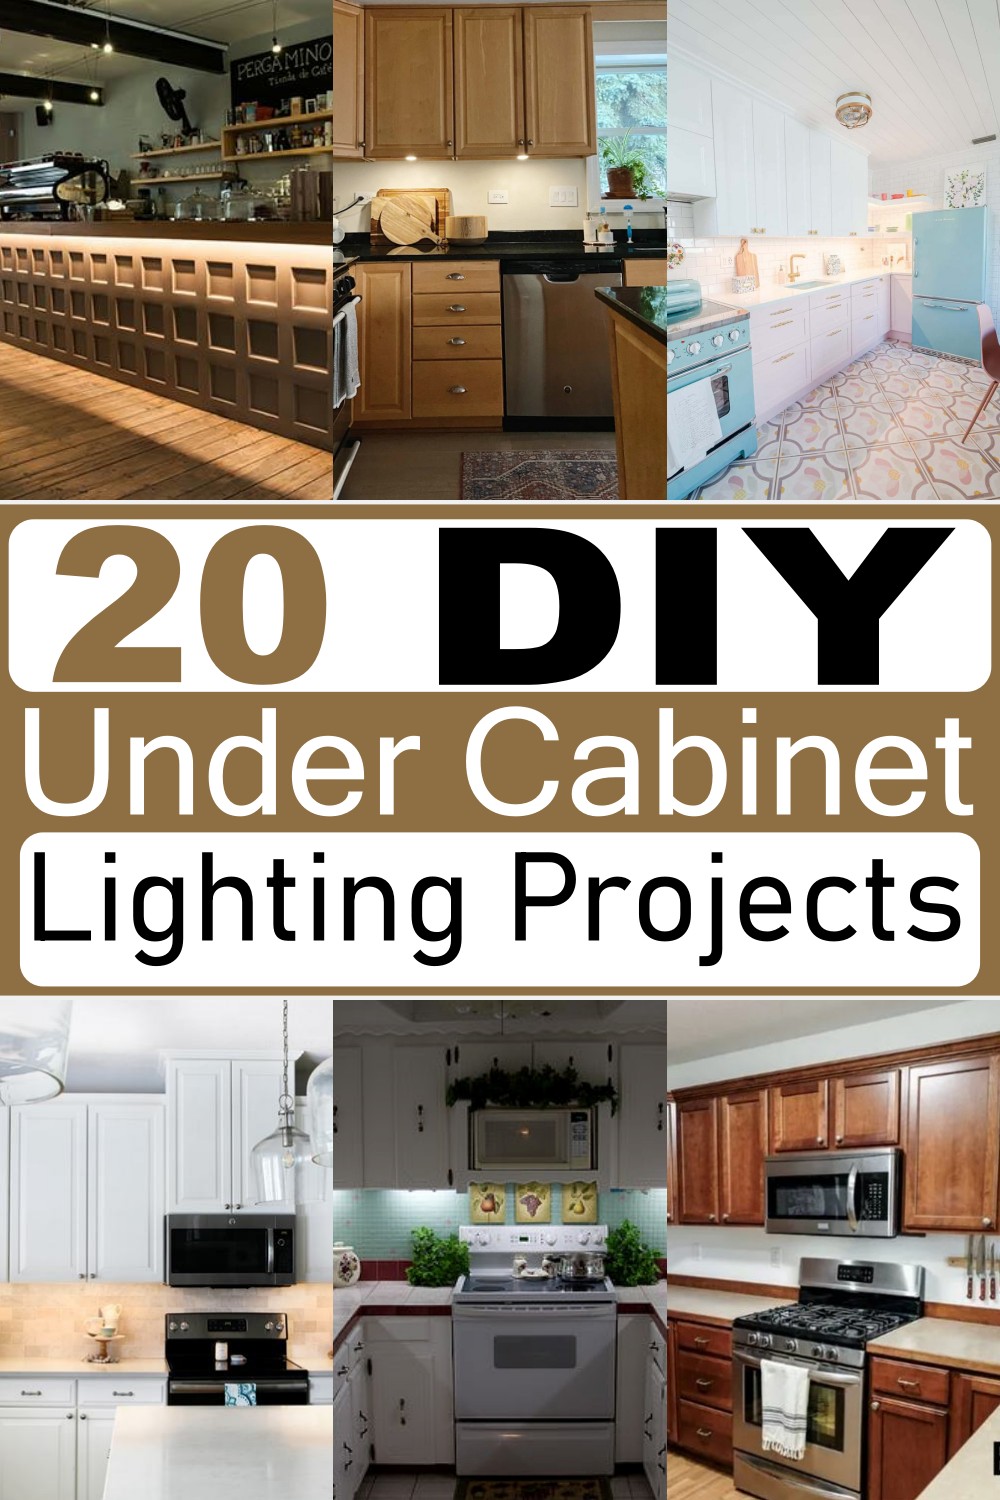 20 DIY Under Cabinet Lighting Projects